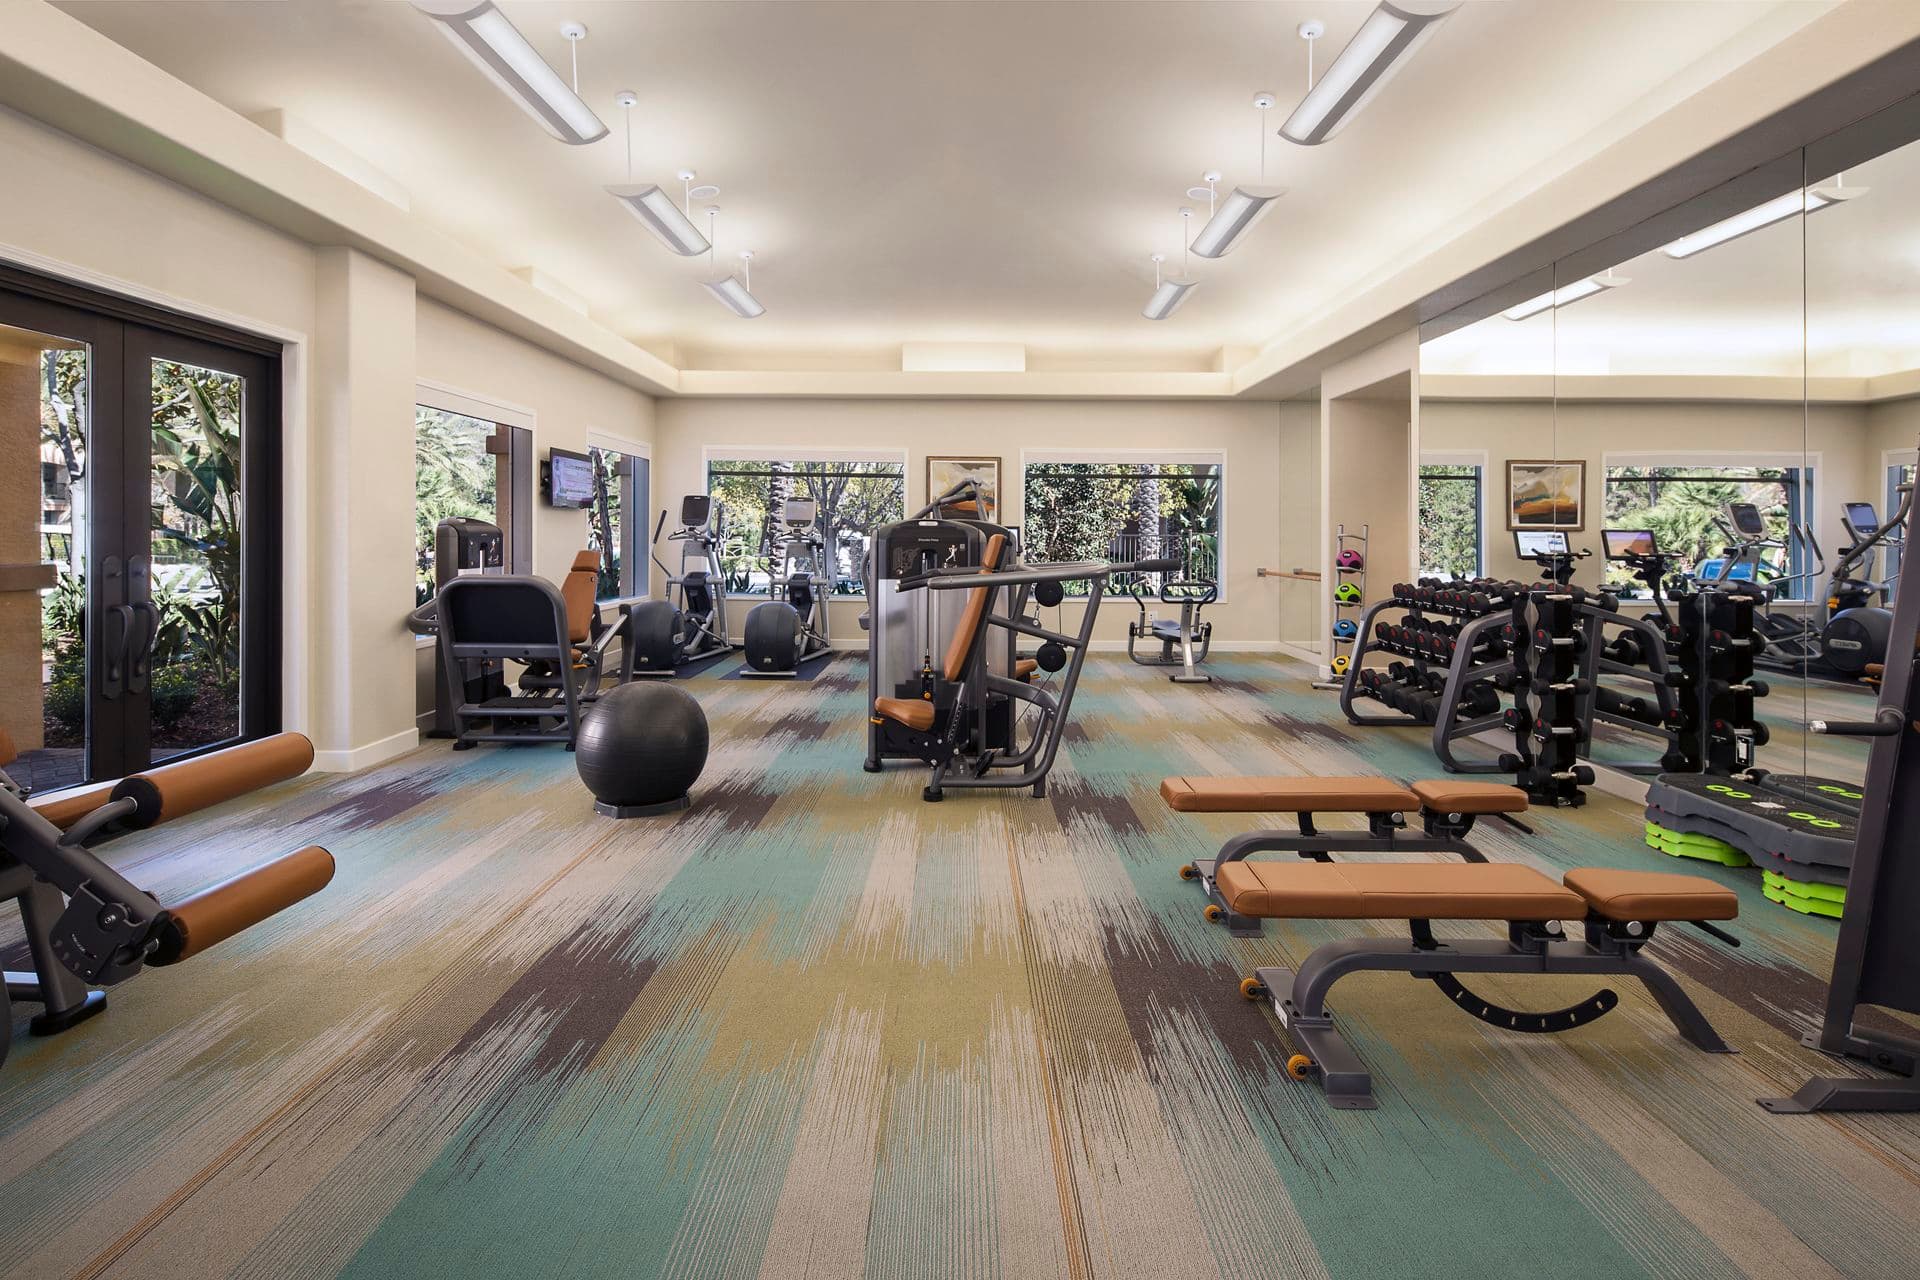 Interior view of fitness center at Torrey Hills Apartment Homes in San Diego, CA.